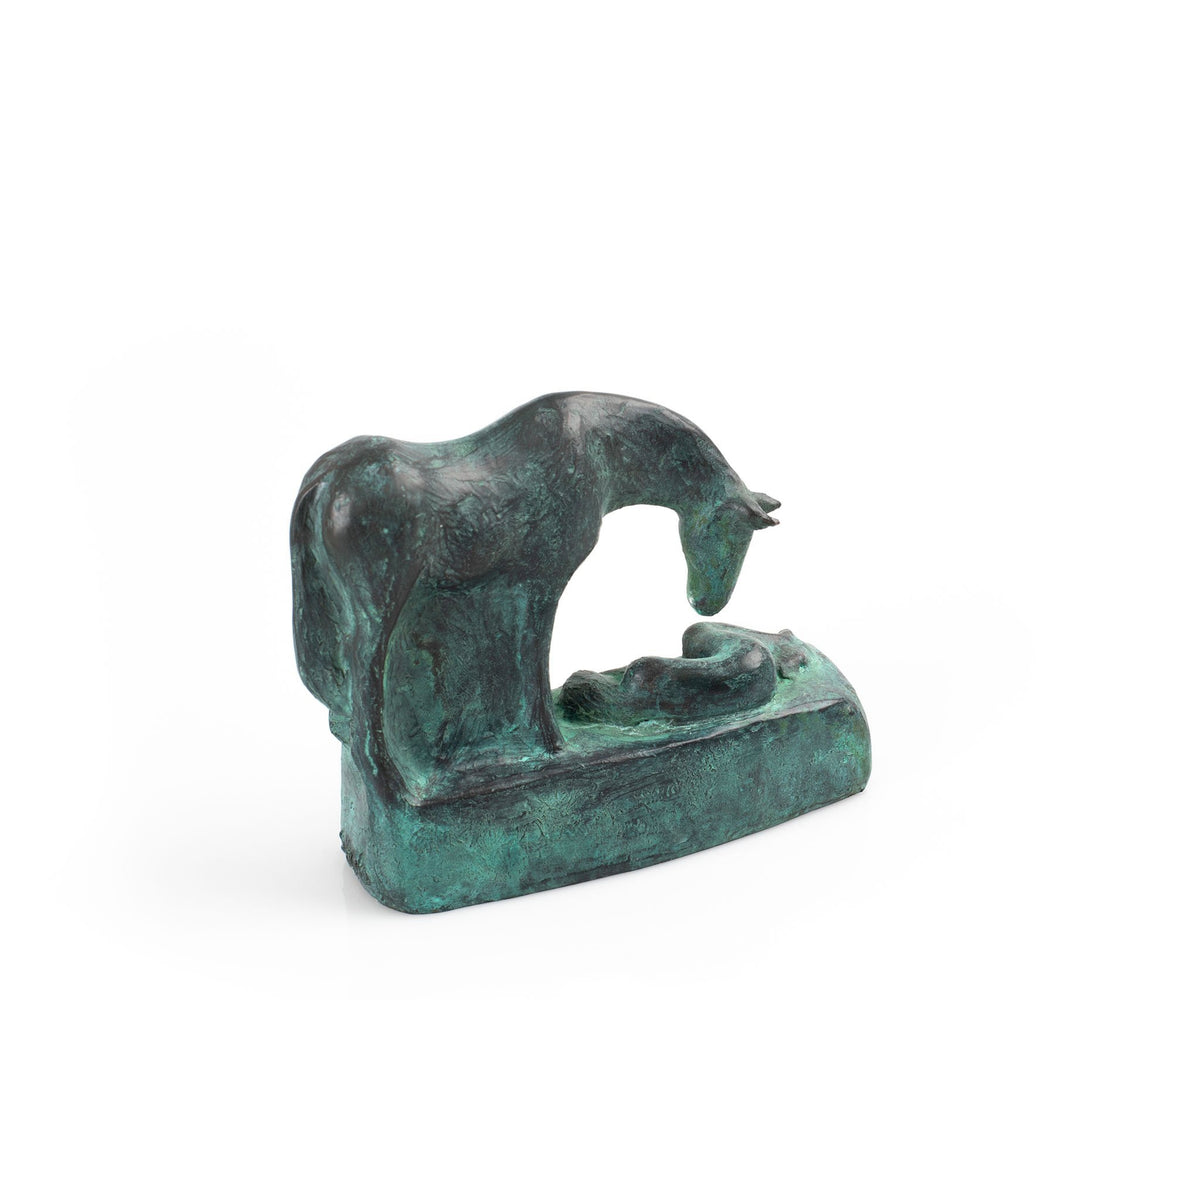 Lying open edition bronze resin sculpture by Sophie Howard, available at Padstow Gallery, Cornwall